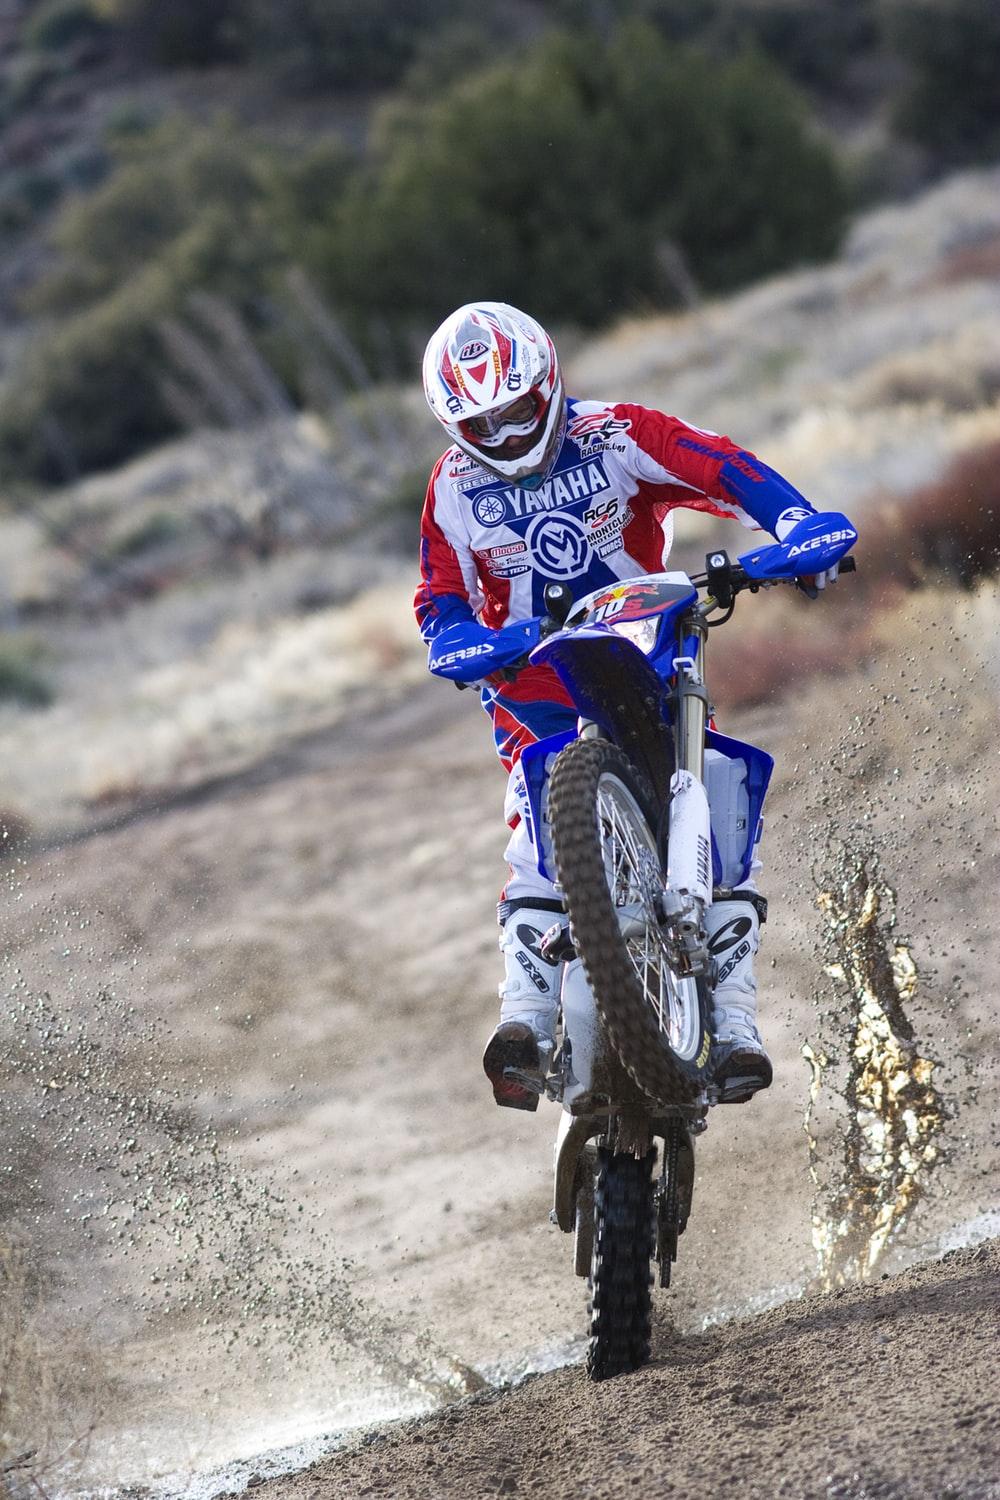 Dirtbike Picture [HD]. Download Free Image